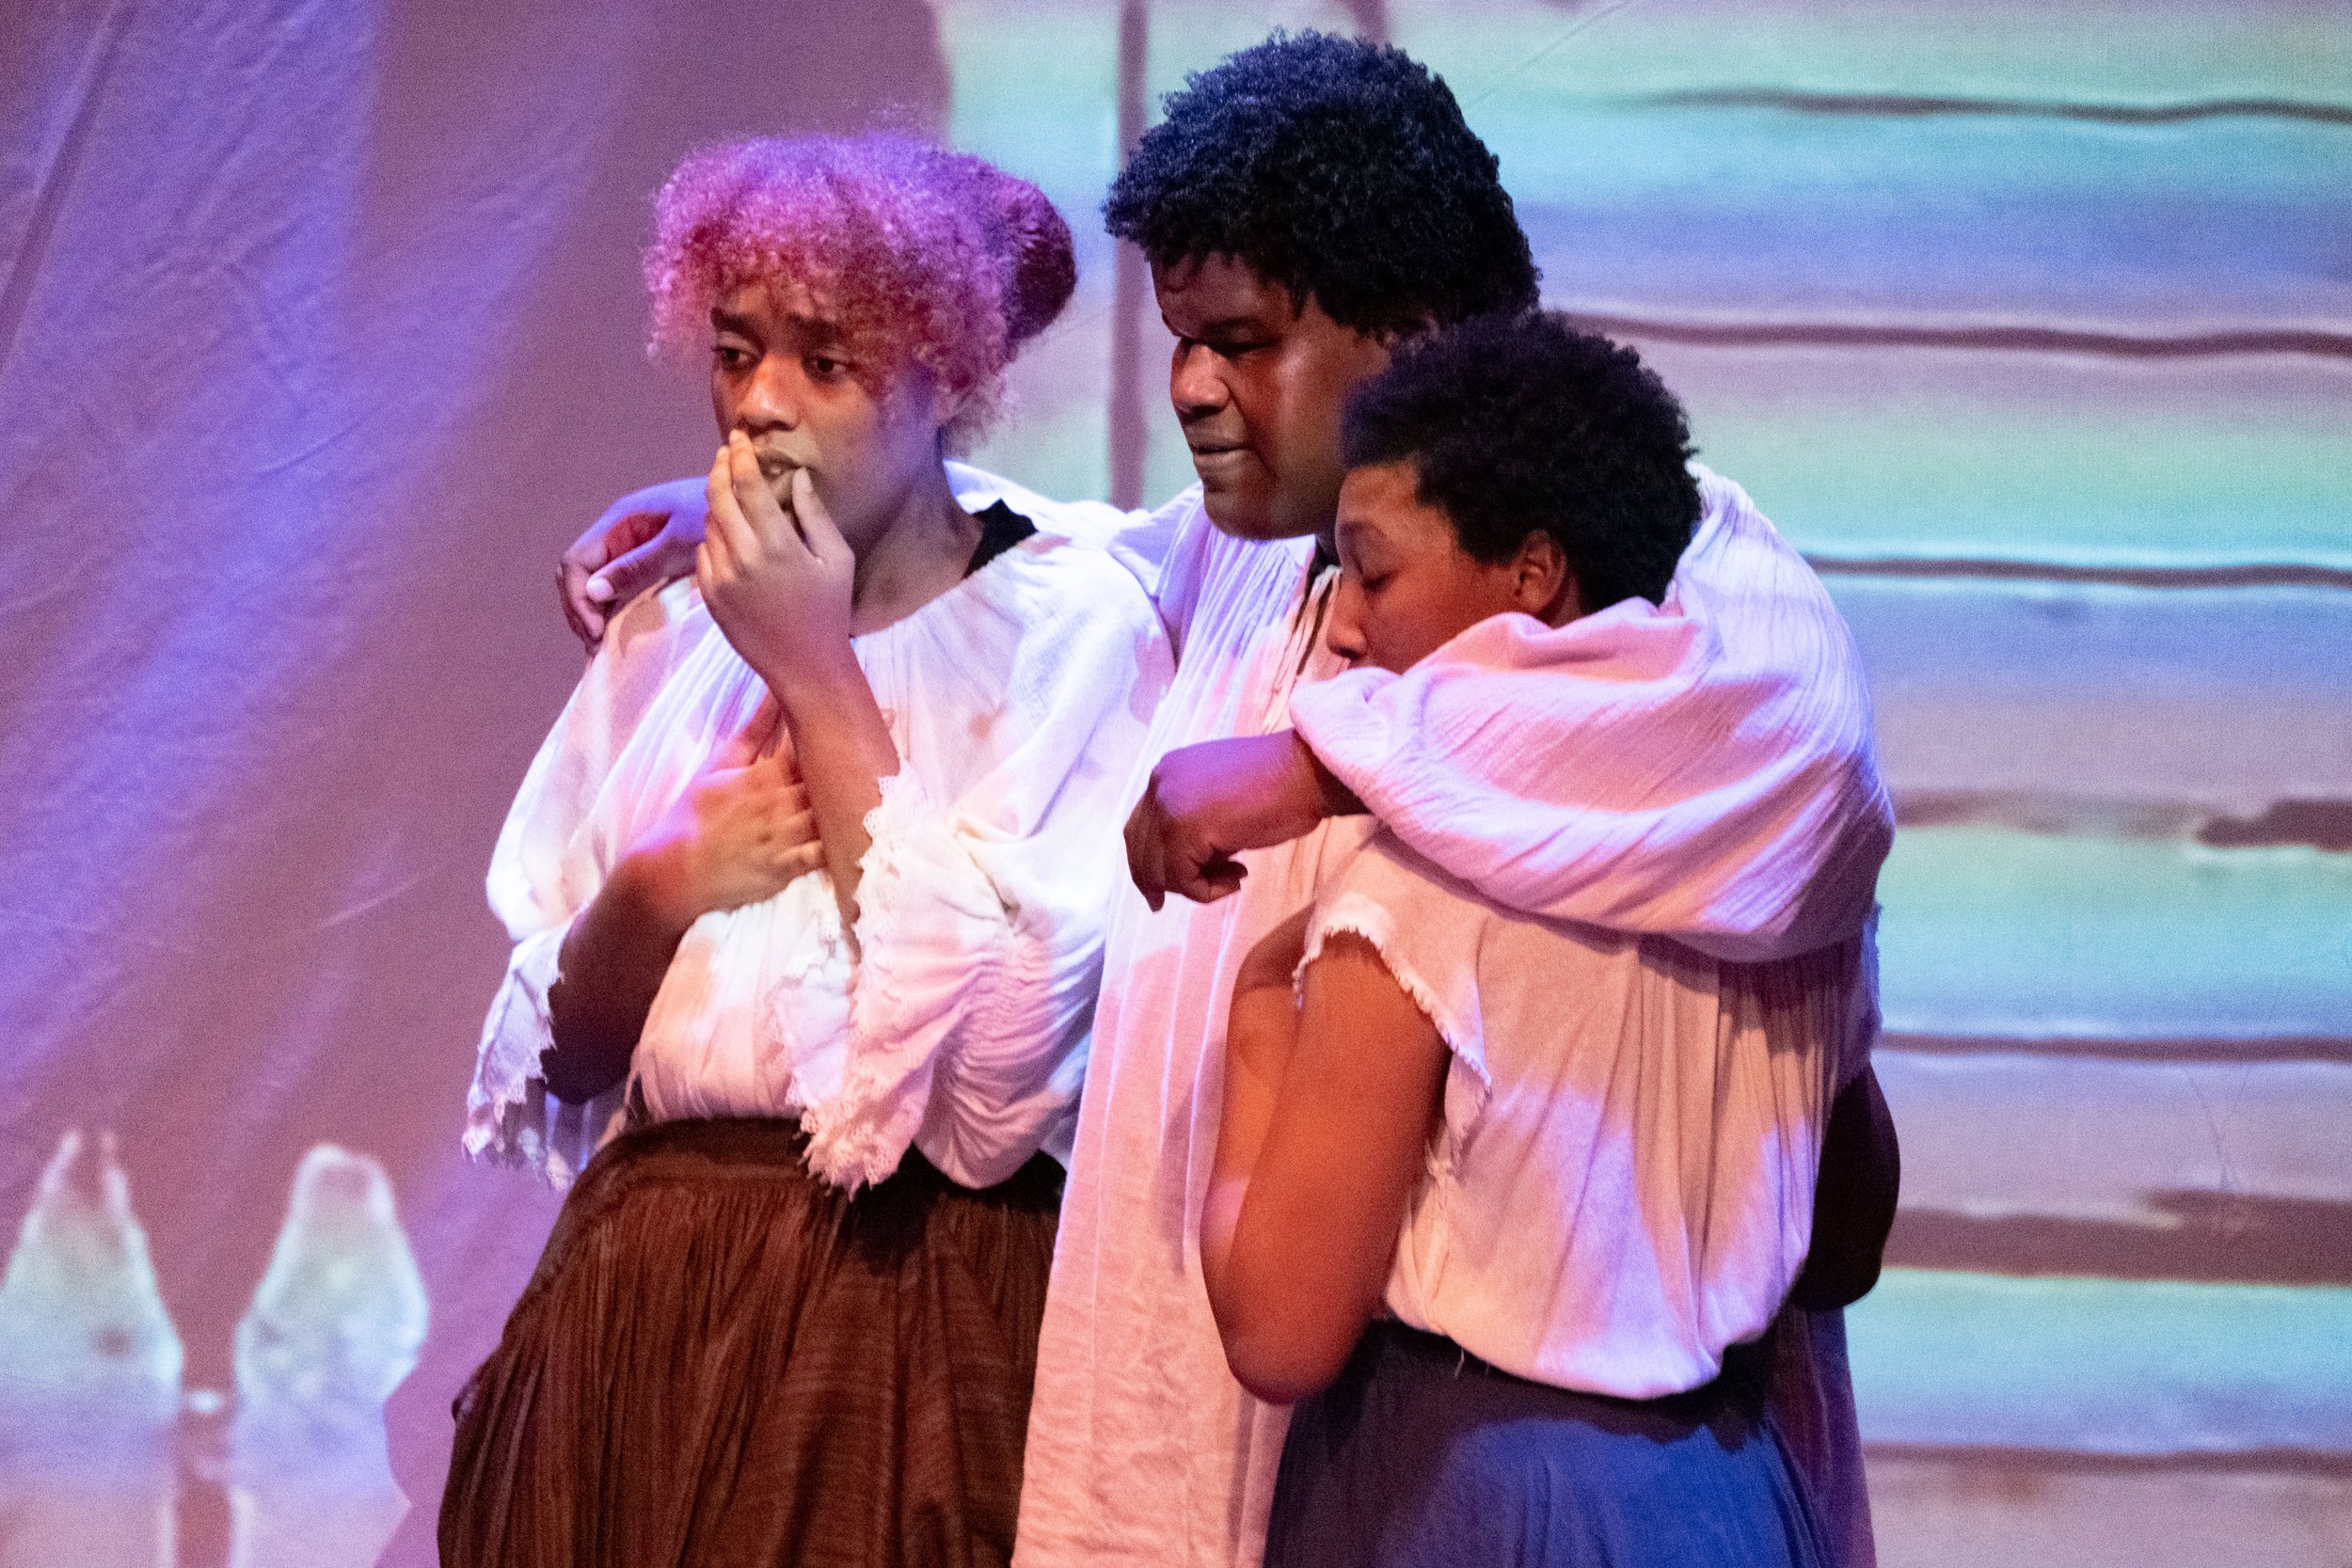  From L to R, Farah Harris, Xcellen Connor and Kyra Surratt react and hold each other as they hear Lucy's story of being whipped during the play "By The River Rivanna," performed on Tuesday Oct. 17th, 2023 in Santa Monica, Calif. at the Santa Monica 